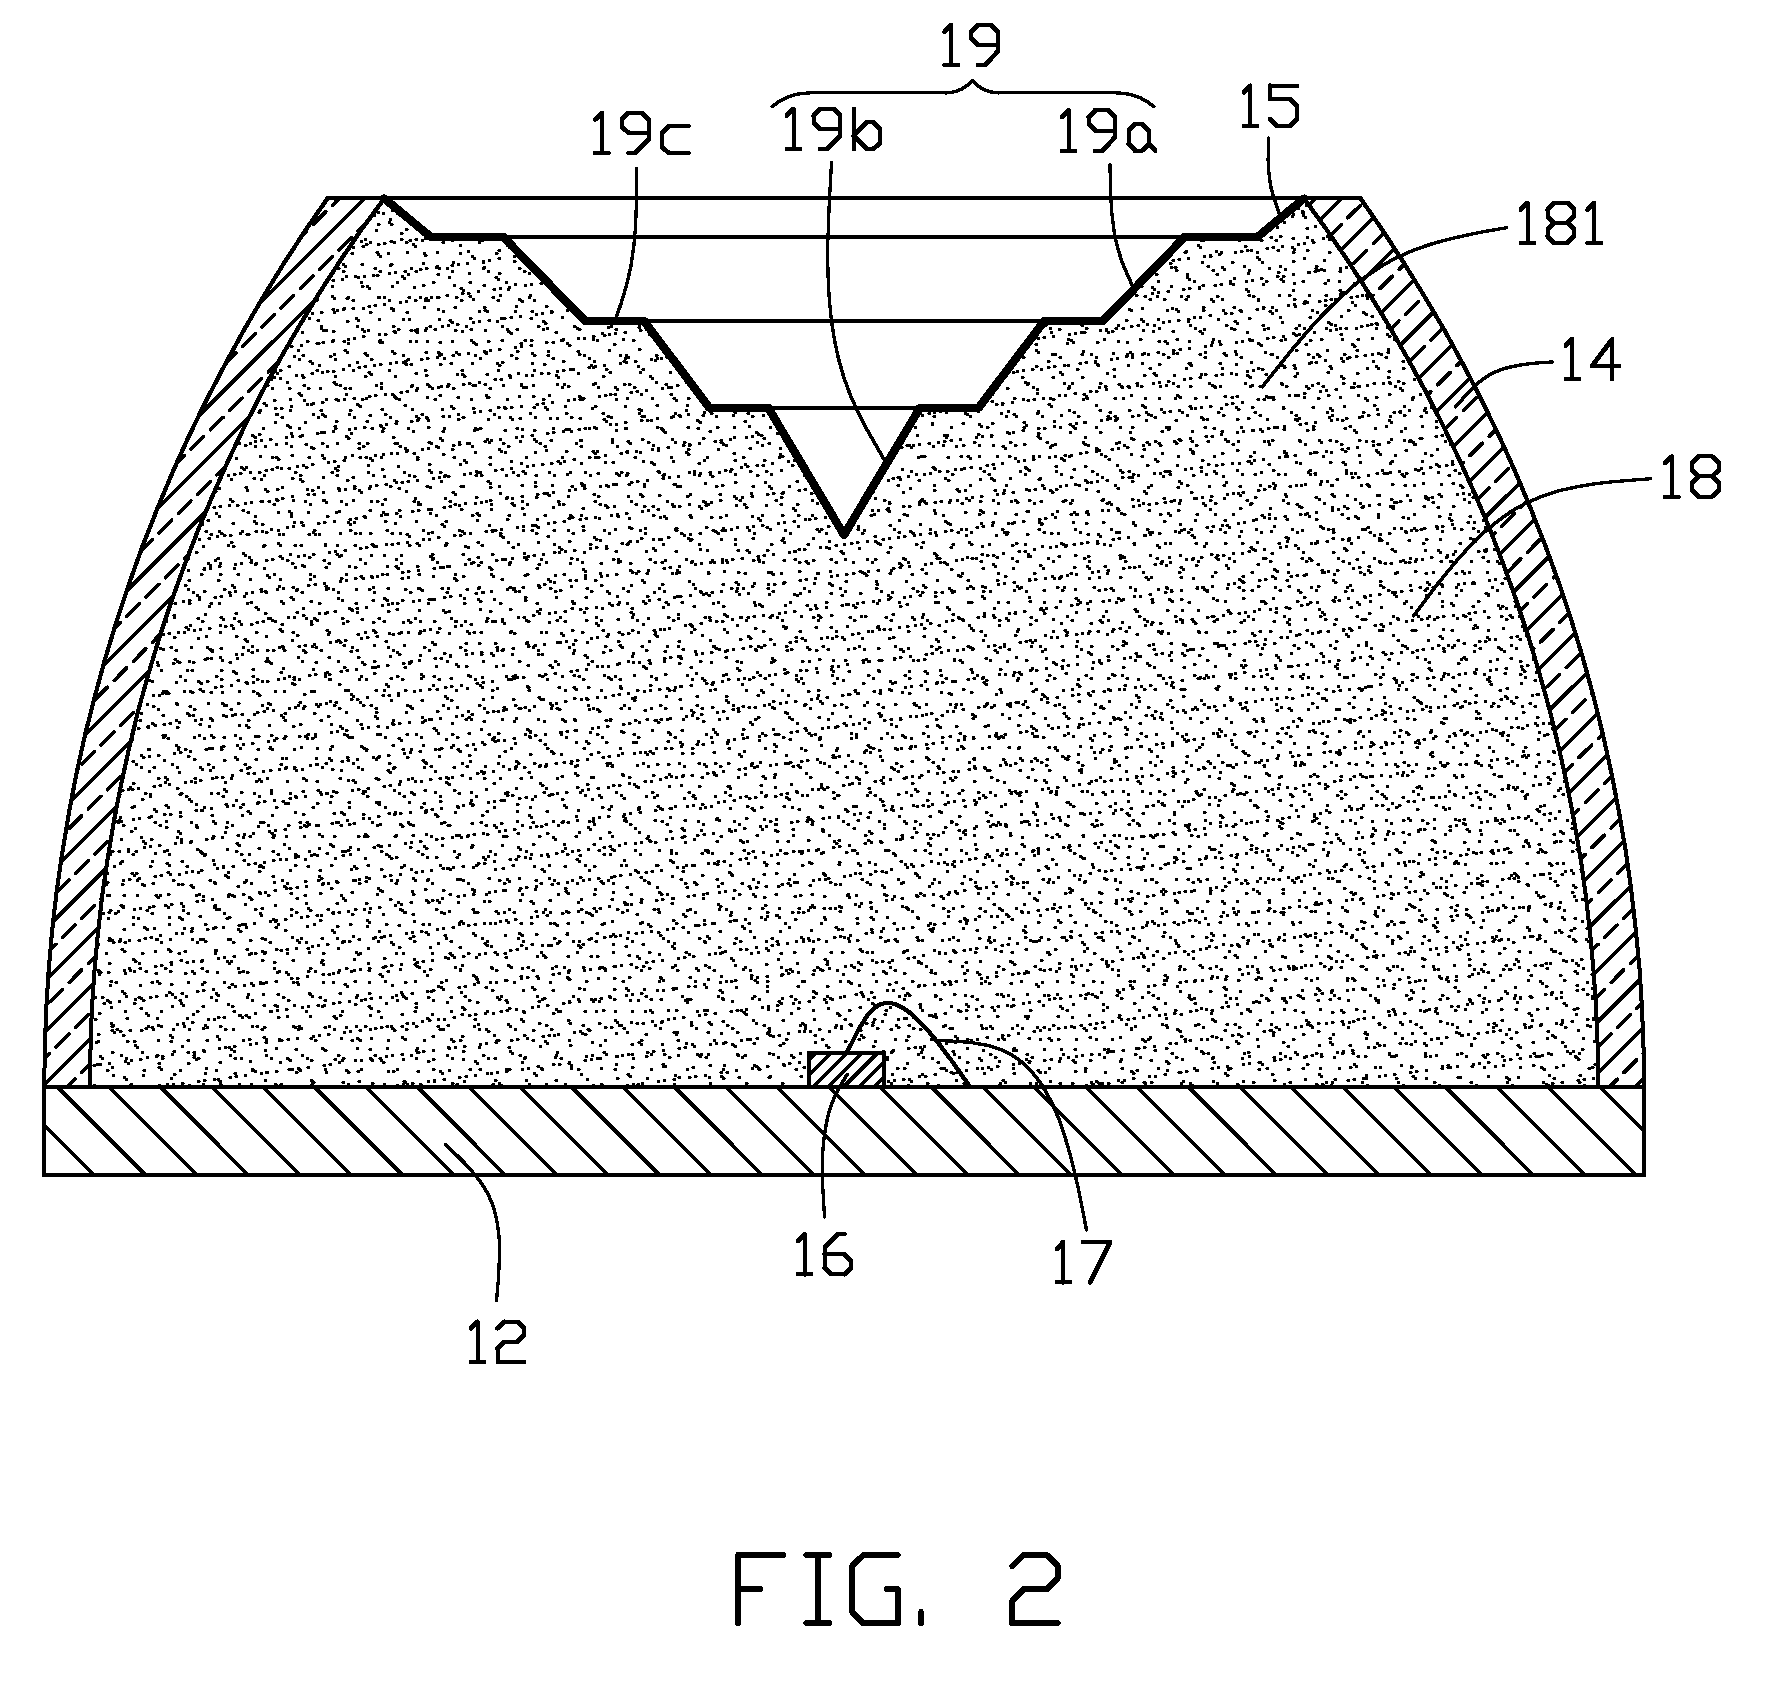 Side-view light emitting diode